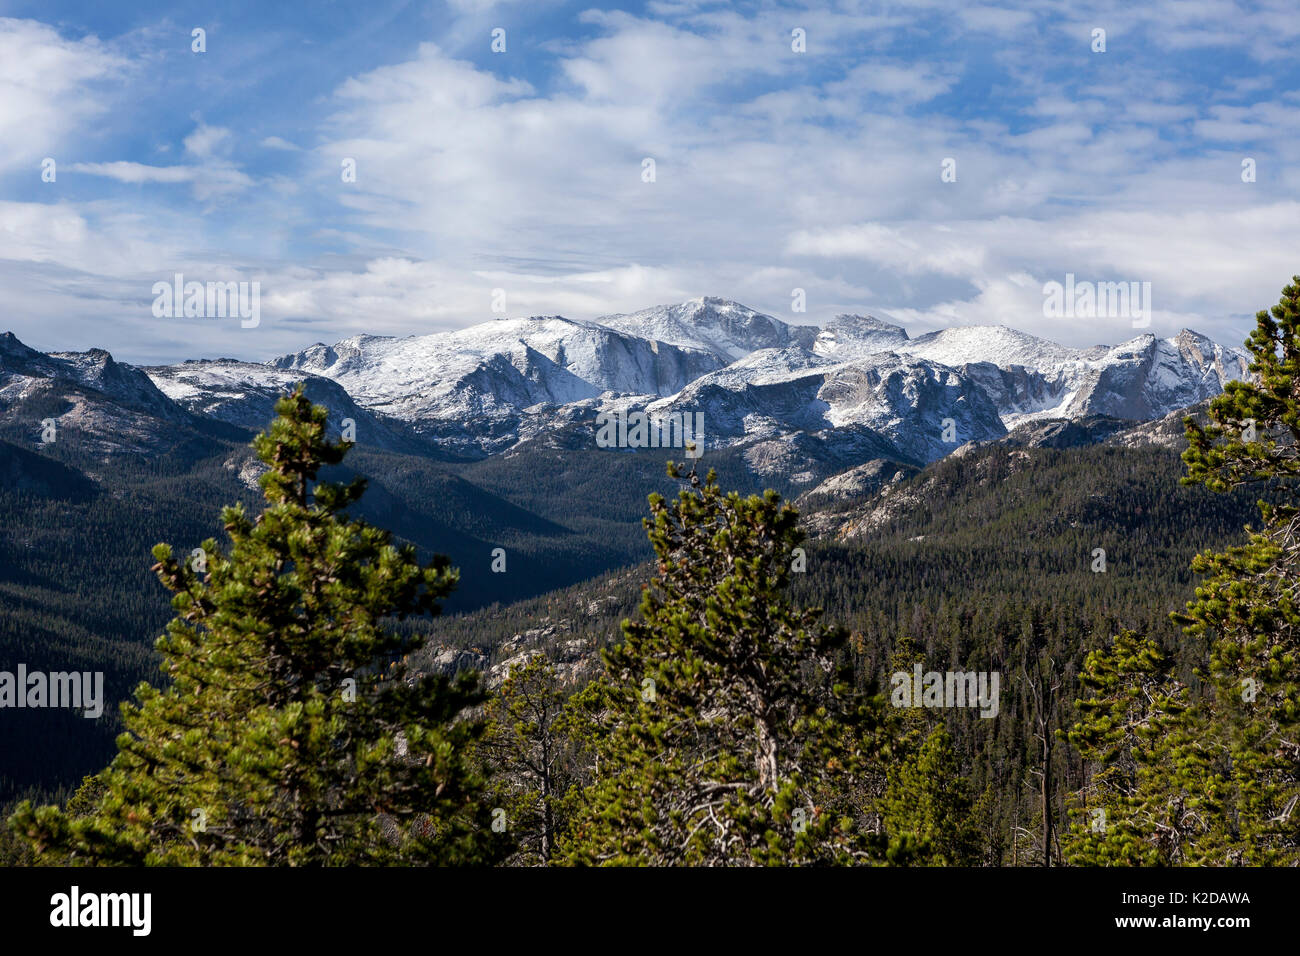 Early snow on summit peaks of Wind River Range from Smith Lake Trail, Popo Agie Wilderness, Wyoming, USA. September 2015. Stock Photo